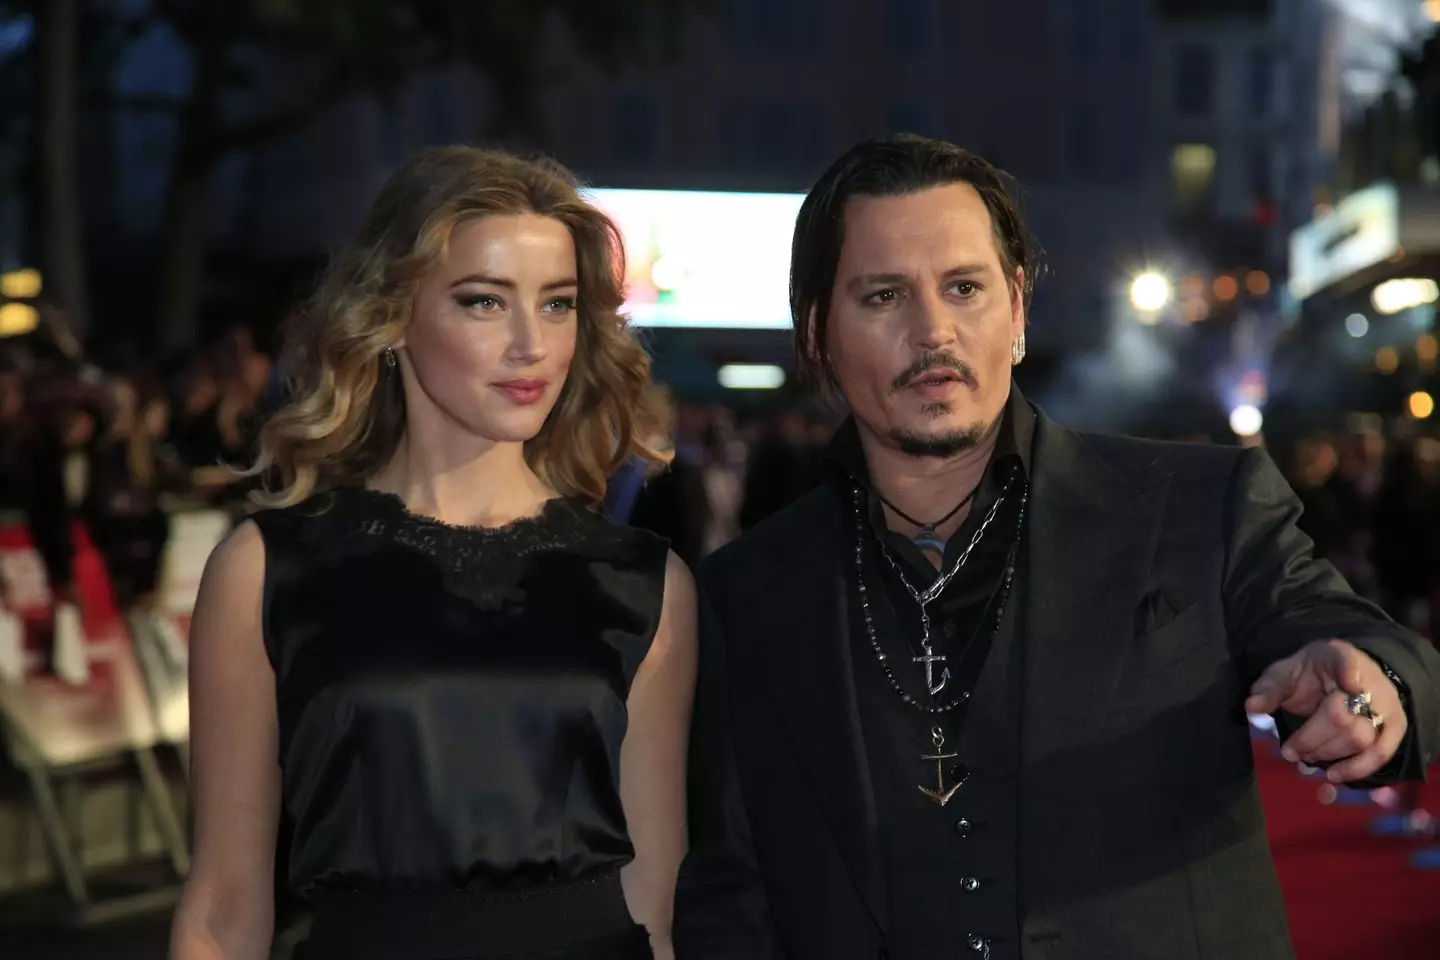 Amber Heard and Johnny Depp together in 2015.